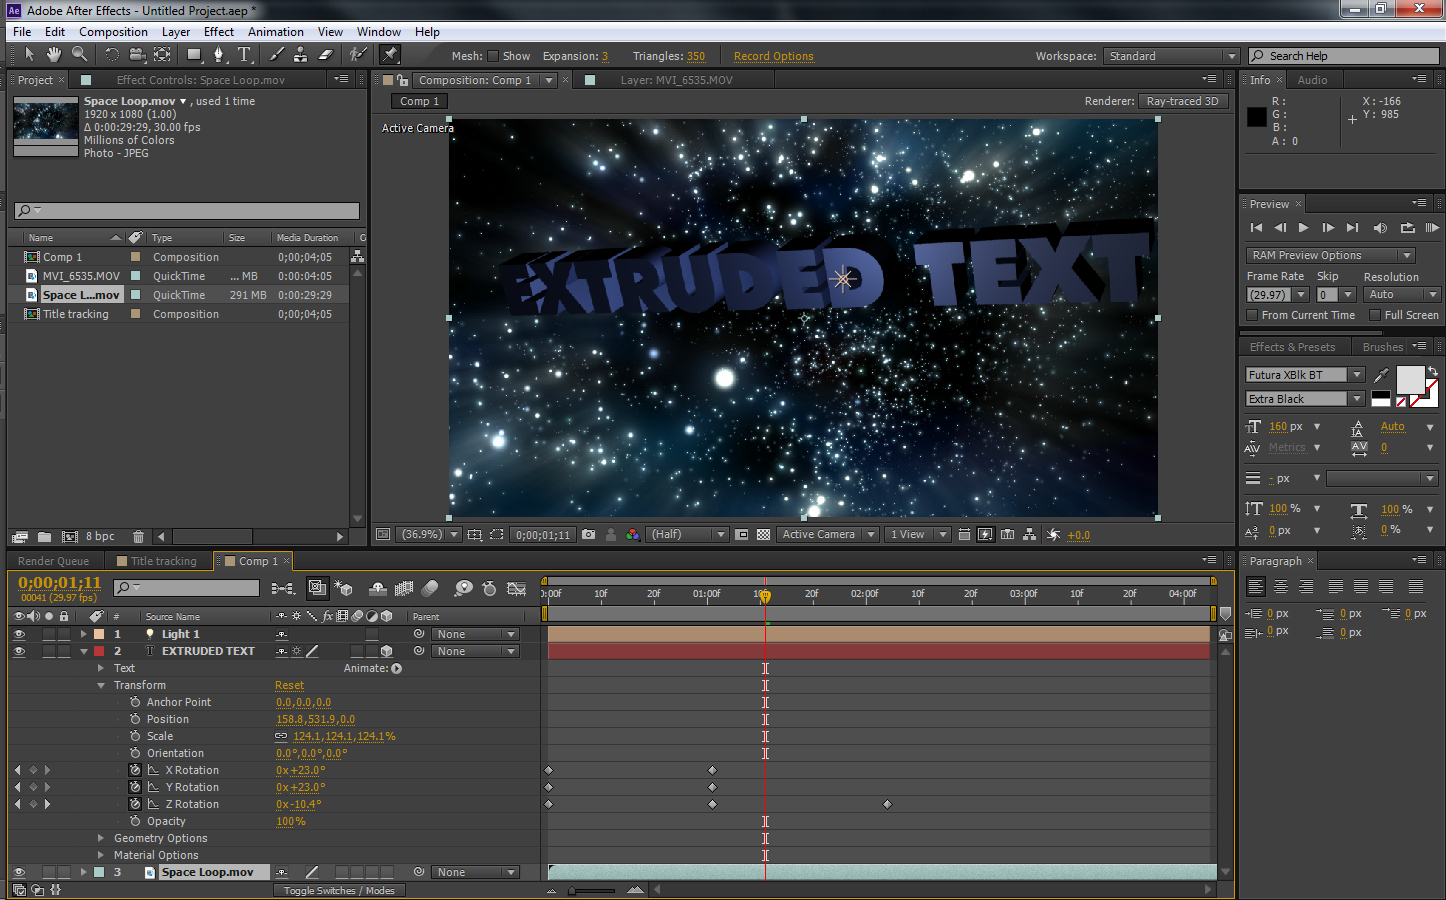 After effects packs. Адоб Афтер эффект 2021. After Effects cs6. Adobe after Effects cs6. Программа after Effects.